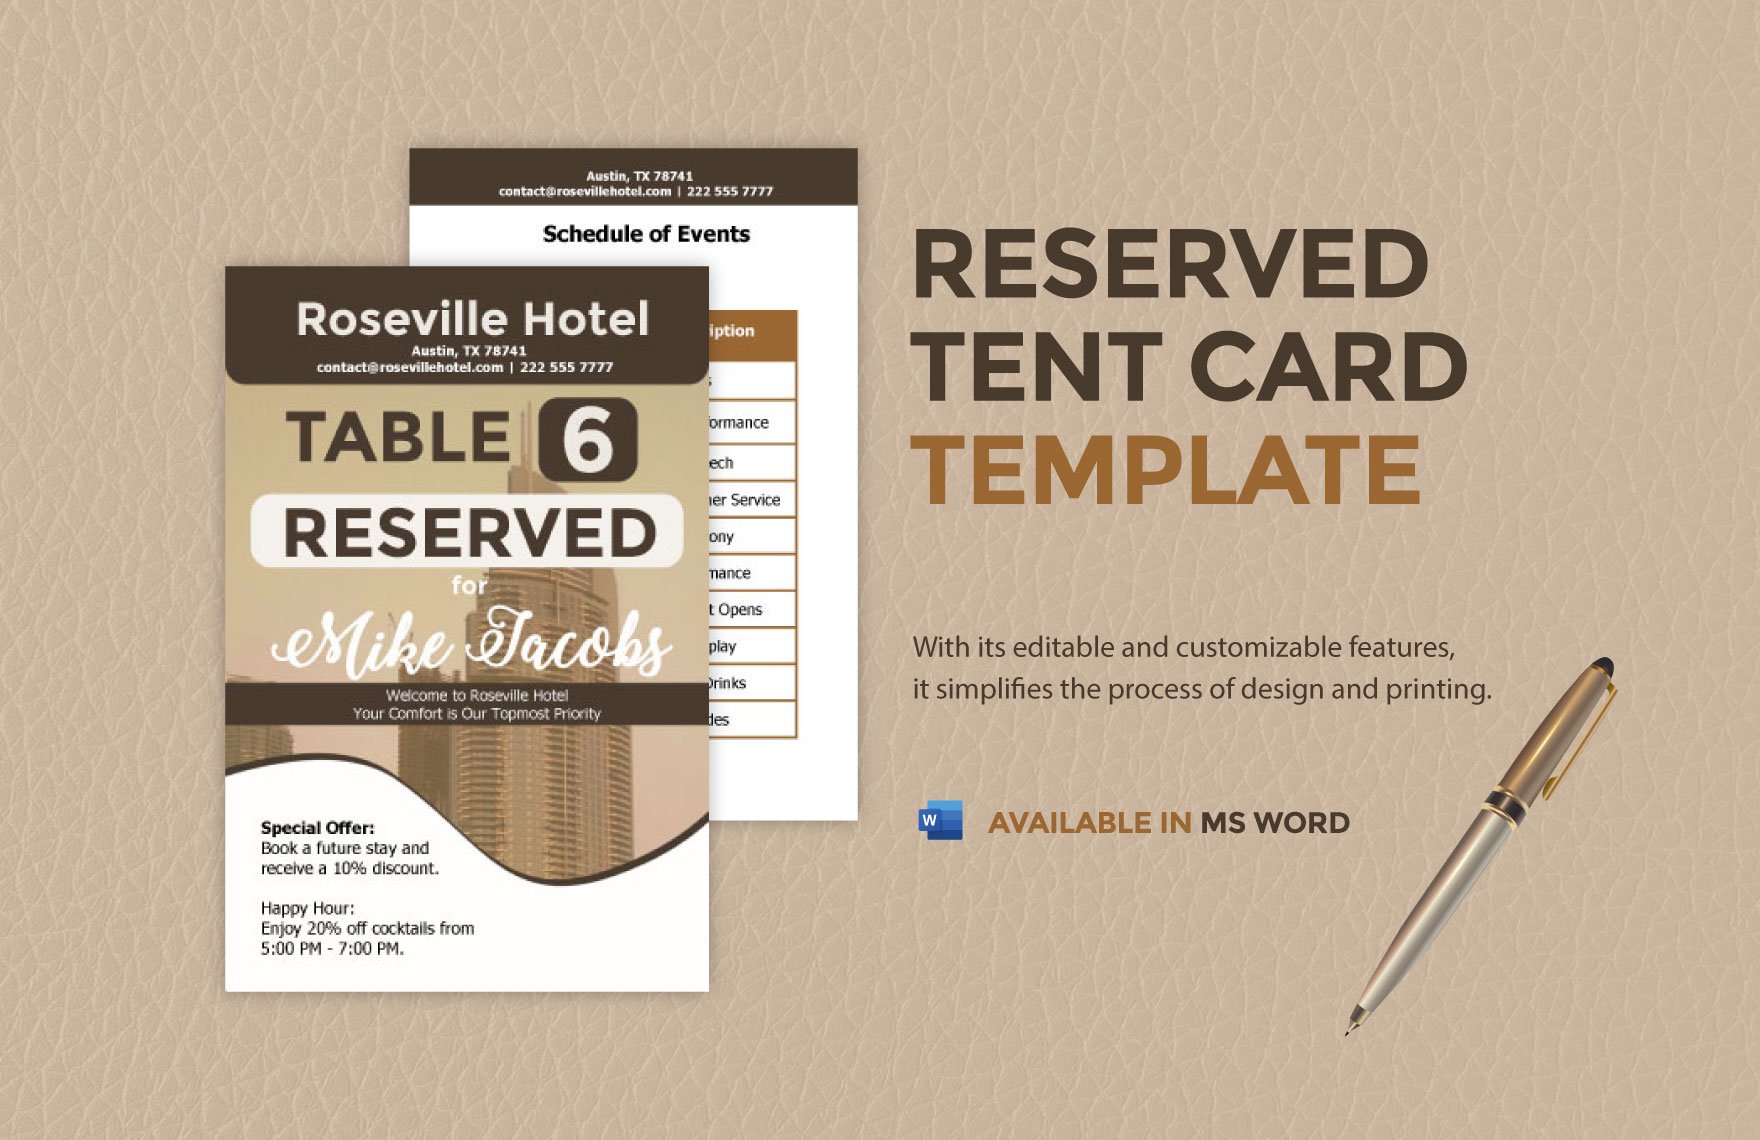 Reserved Tent Card Template